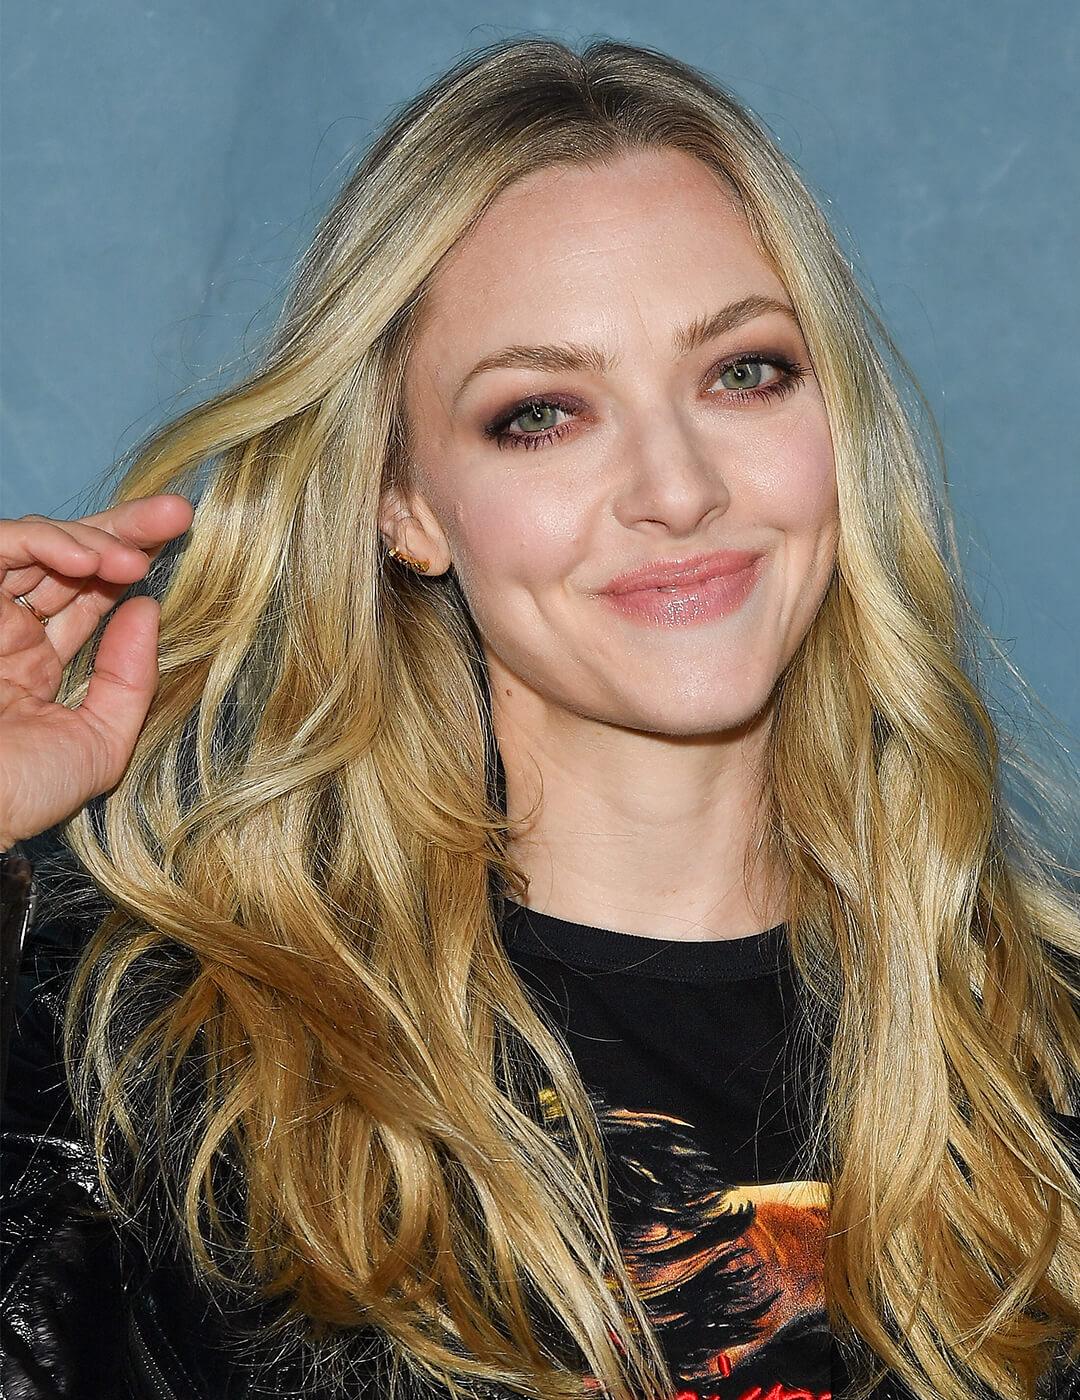 A photo of Amanda Seyfried with a layered style blond hair wearing a black shirt